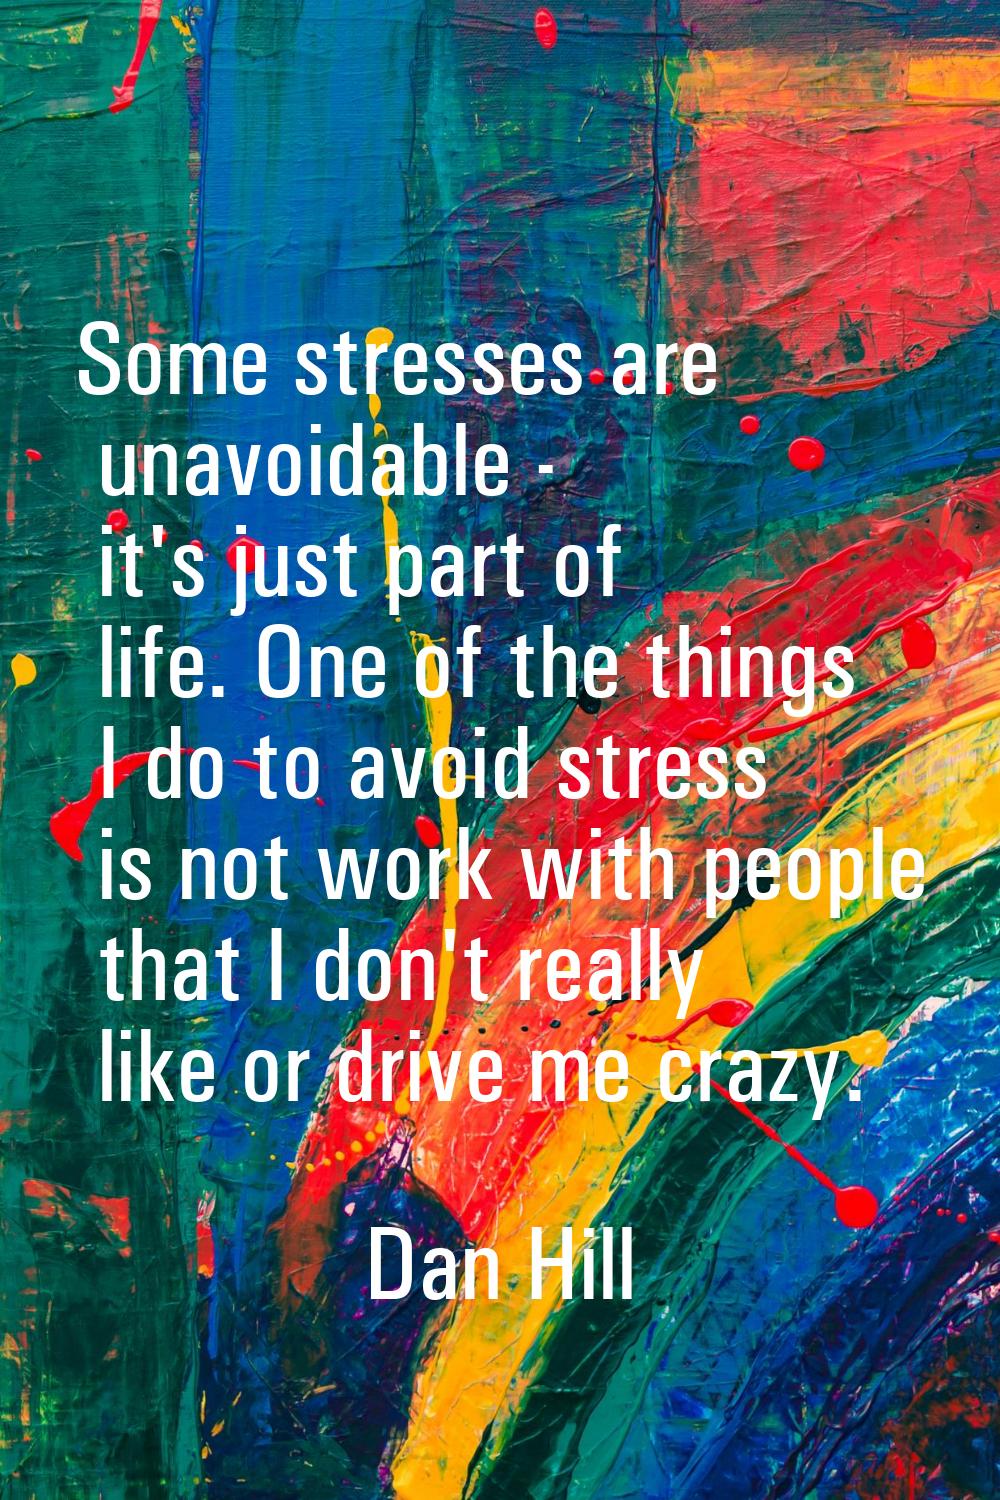 Some stresses are unavoidable - it's just part of life. One of the things I do to avoid stress is n